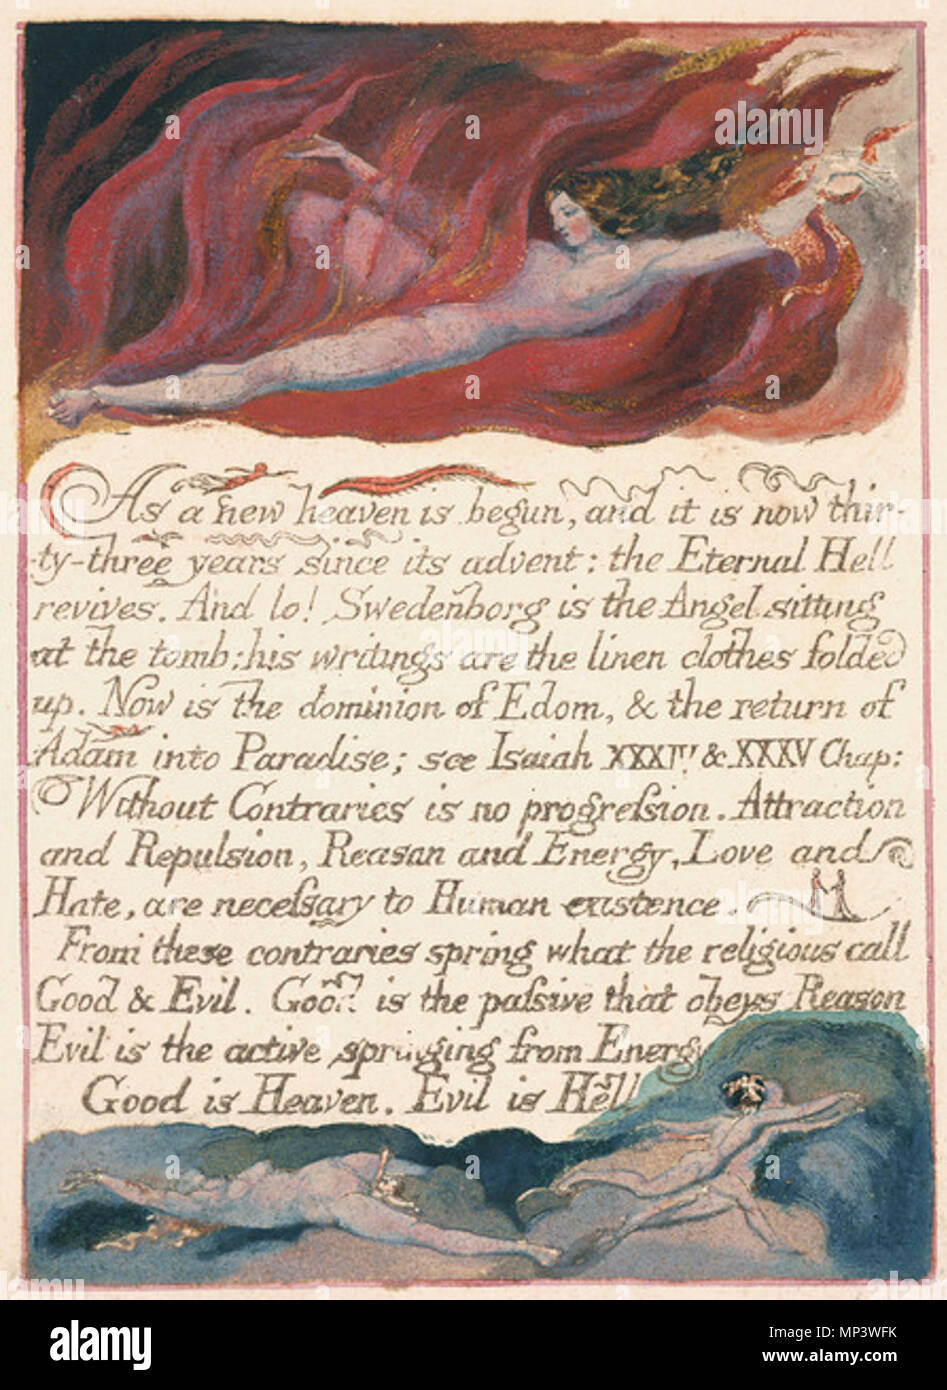 .  English: The Marriage of Heaven and Hell copy E 1794 Fitzwilliam Museum object 3 . 1794.    William Blake  (1757–1827)       Alternative names W. Blake; Uil'iam Bleik  Description British painter, poet, writer, theologian, collector and engraver  Date of birth/death 28 November 1757 12 August 1827  Location of birth/death Broadwick Street Charing Cross  Work location London  Authority control  : Q41513 VIAF: 54144439 ISNI: 0000 0001 2096 135X ULAN: 500012489 LCCN: n78095331 NLA: 35019221 WorldCat 1177 The Marriage of Heaven and Hell copy E 1794 Fitzwilliam Museum object 3 Stock Photo